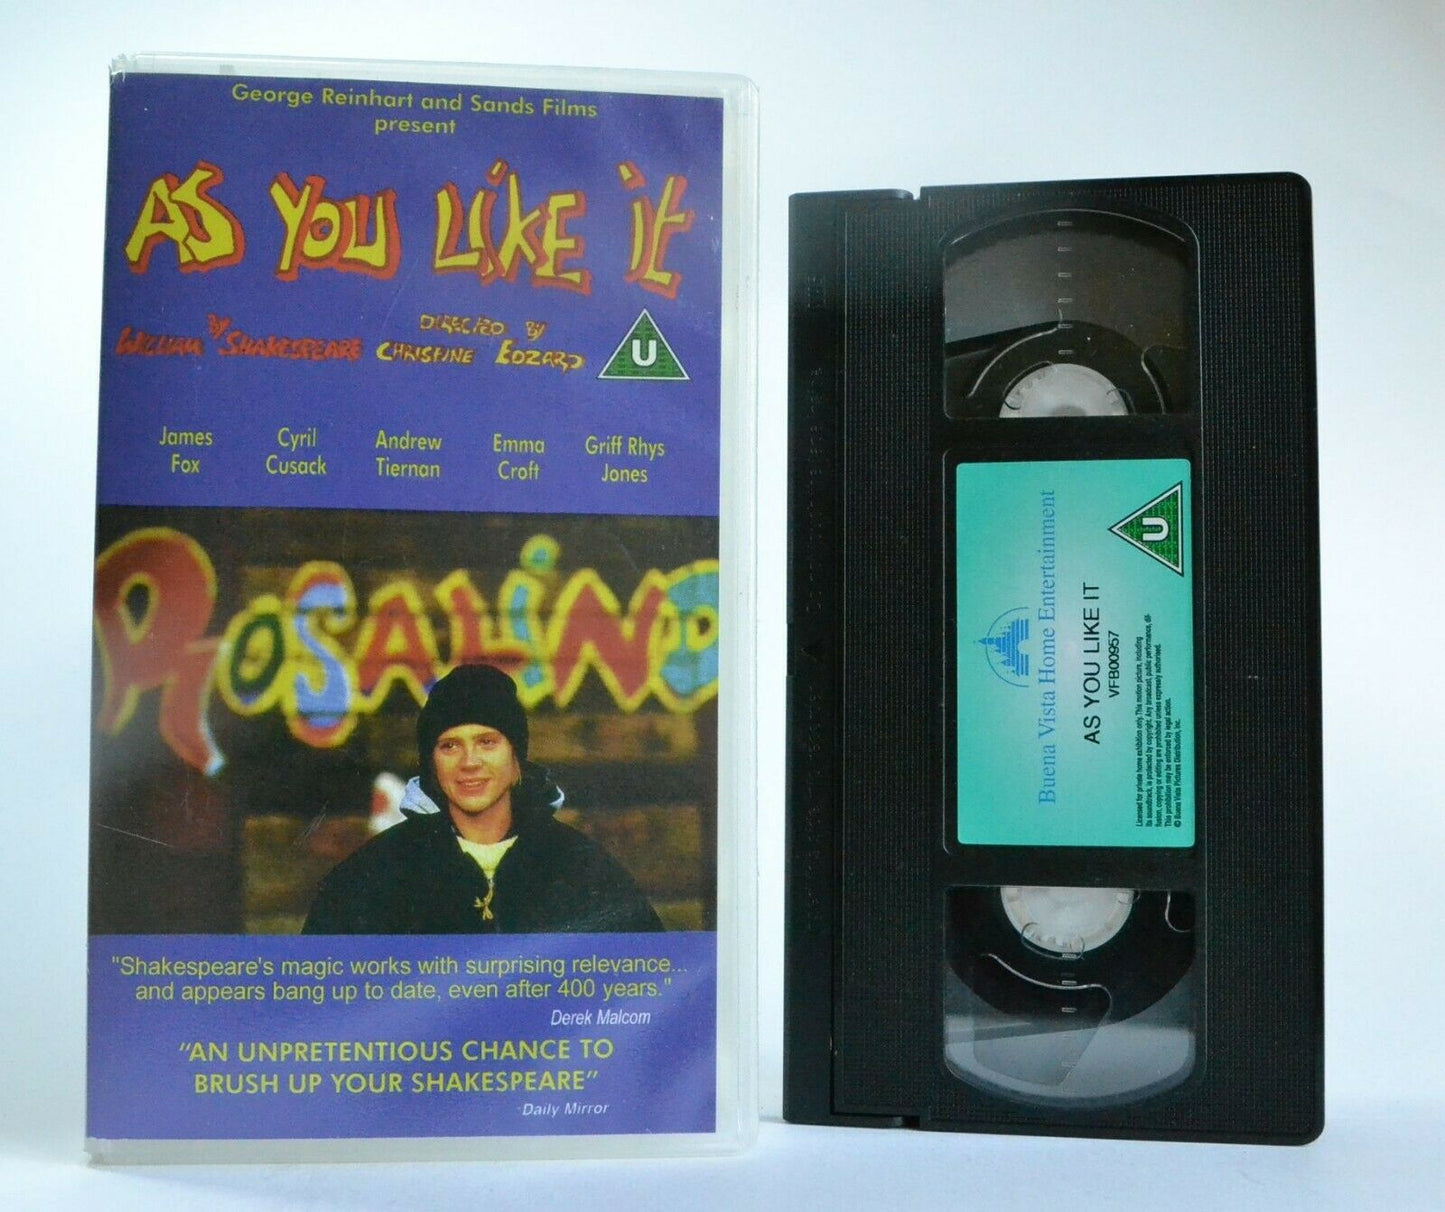 As You Like It (1992): Based On W.Shakespeare Comedy - Romance - James Fox - VHS-